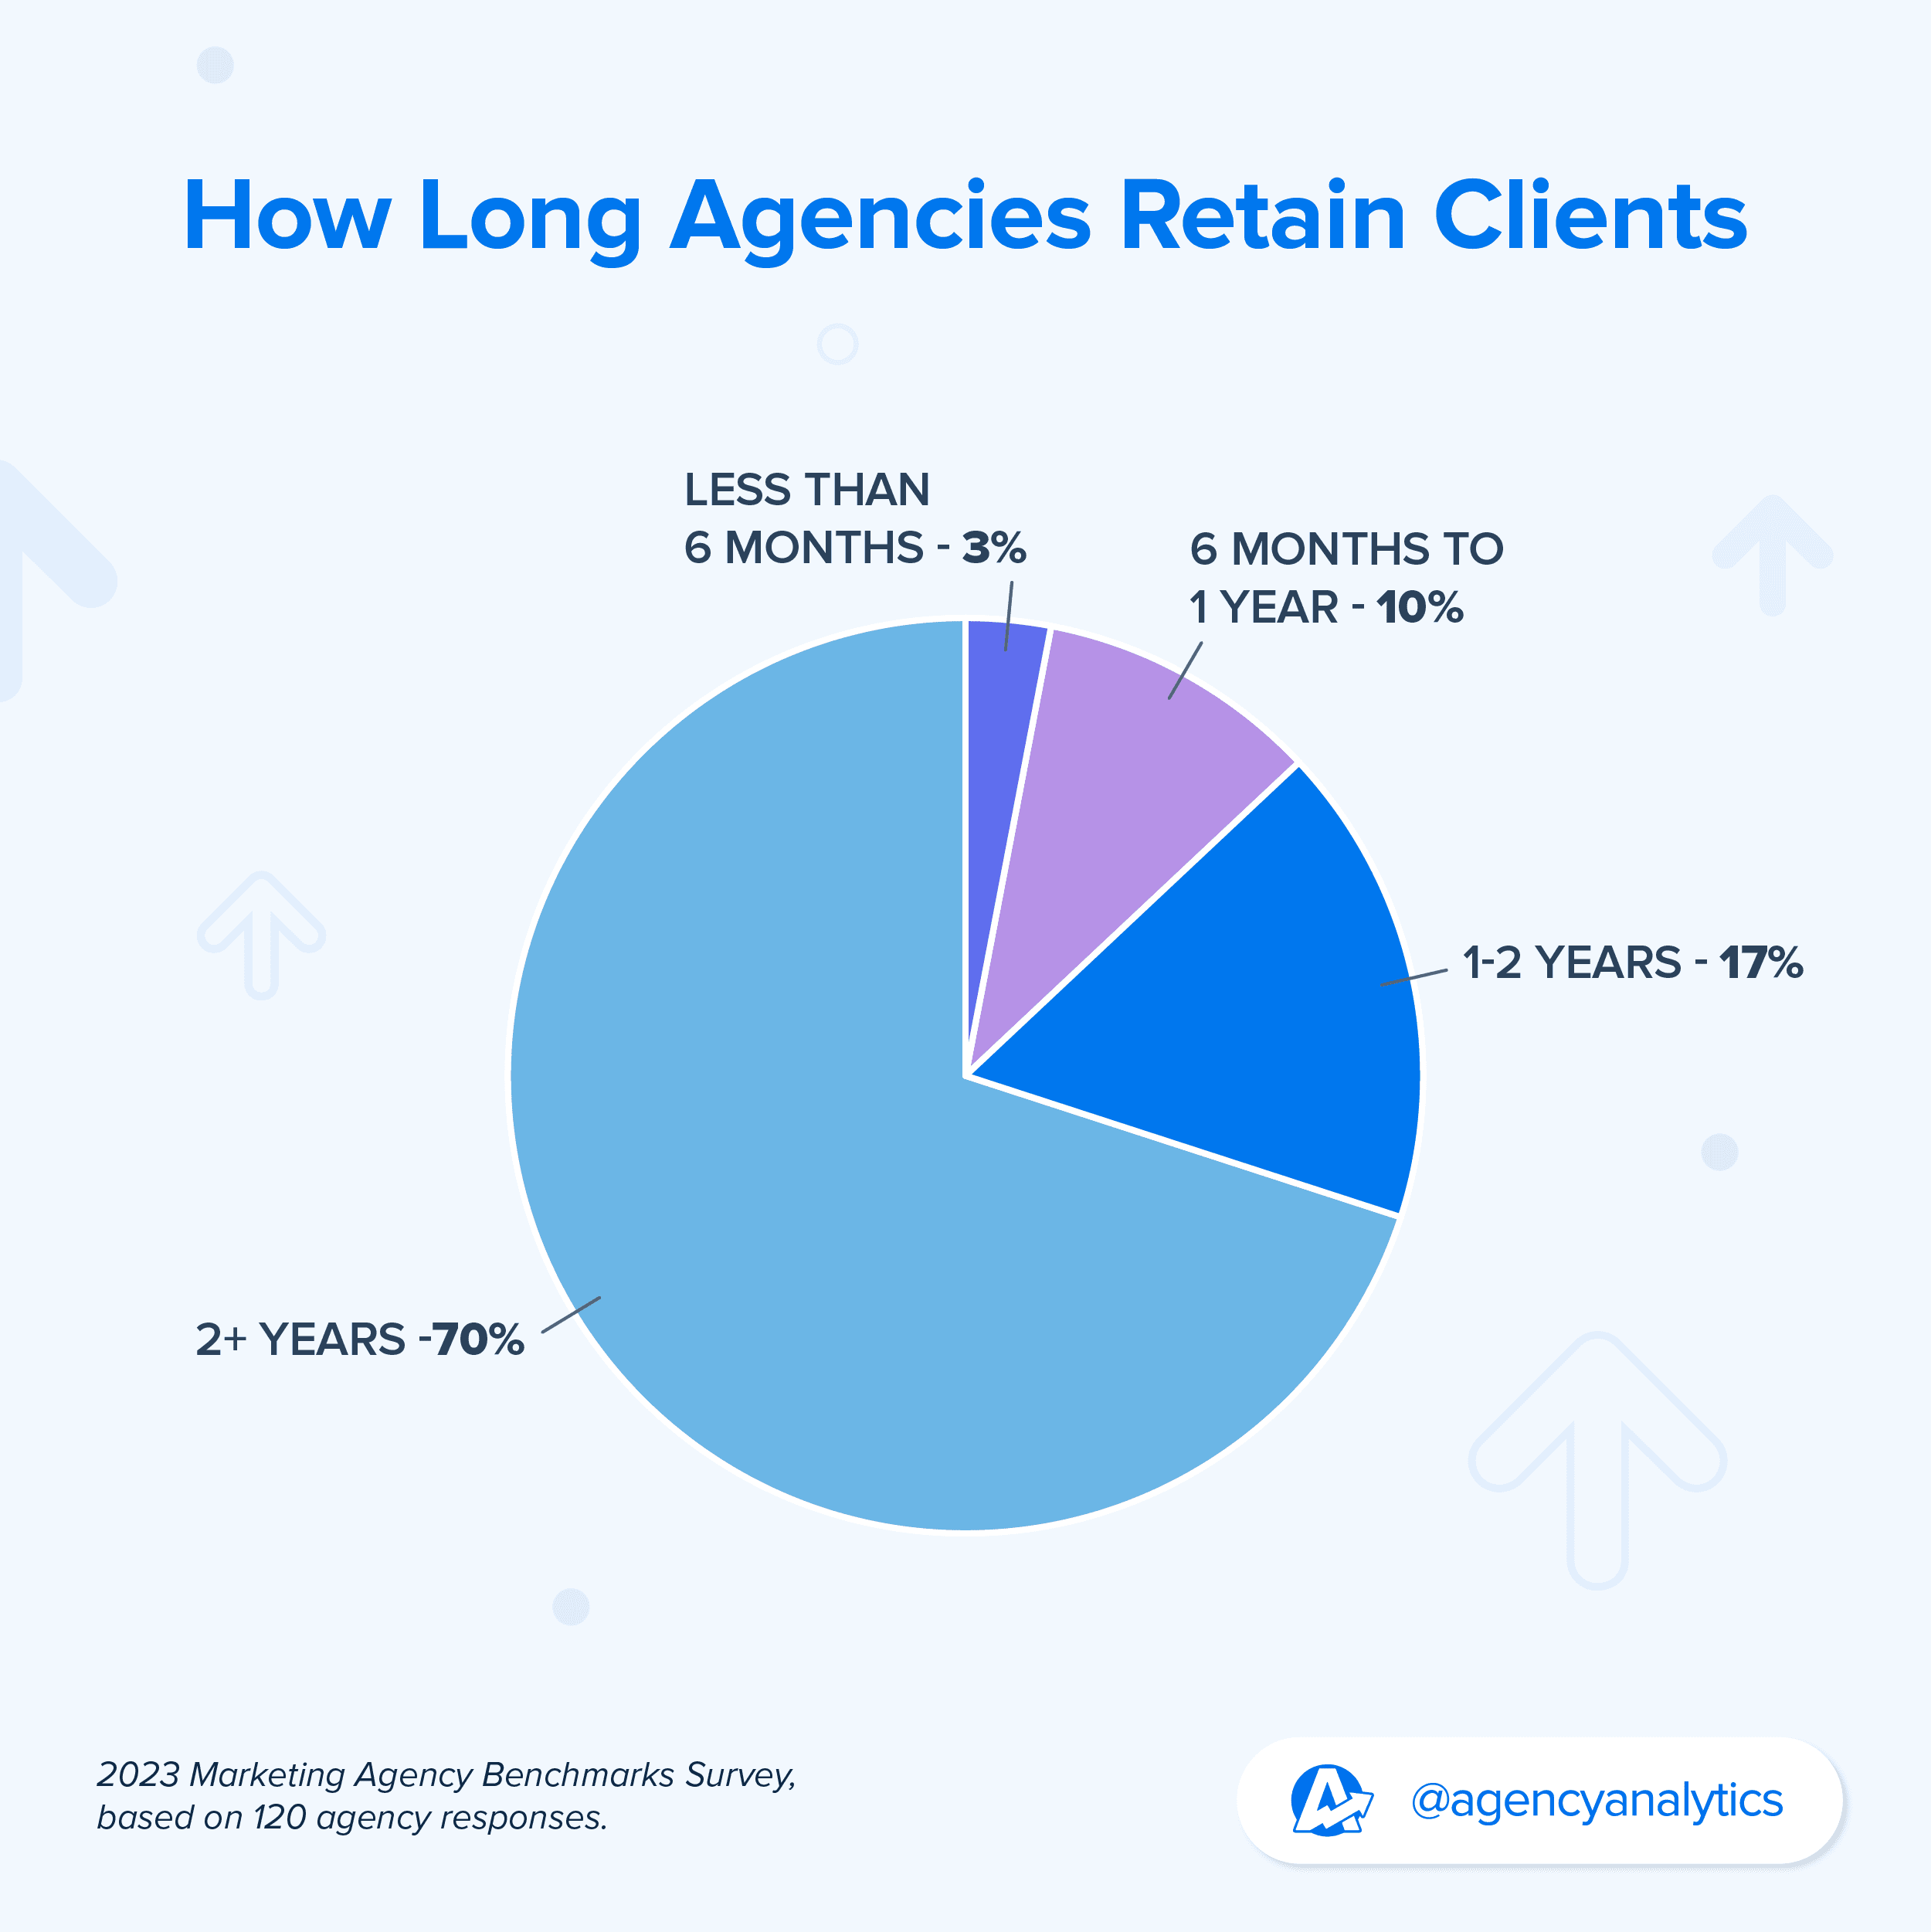 pie chart showing that the agencies surveyed showed varying durations of client retention